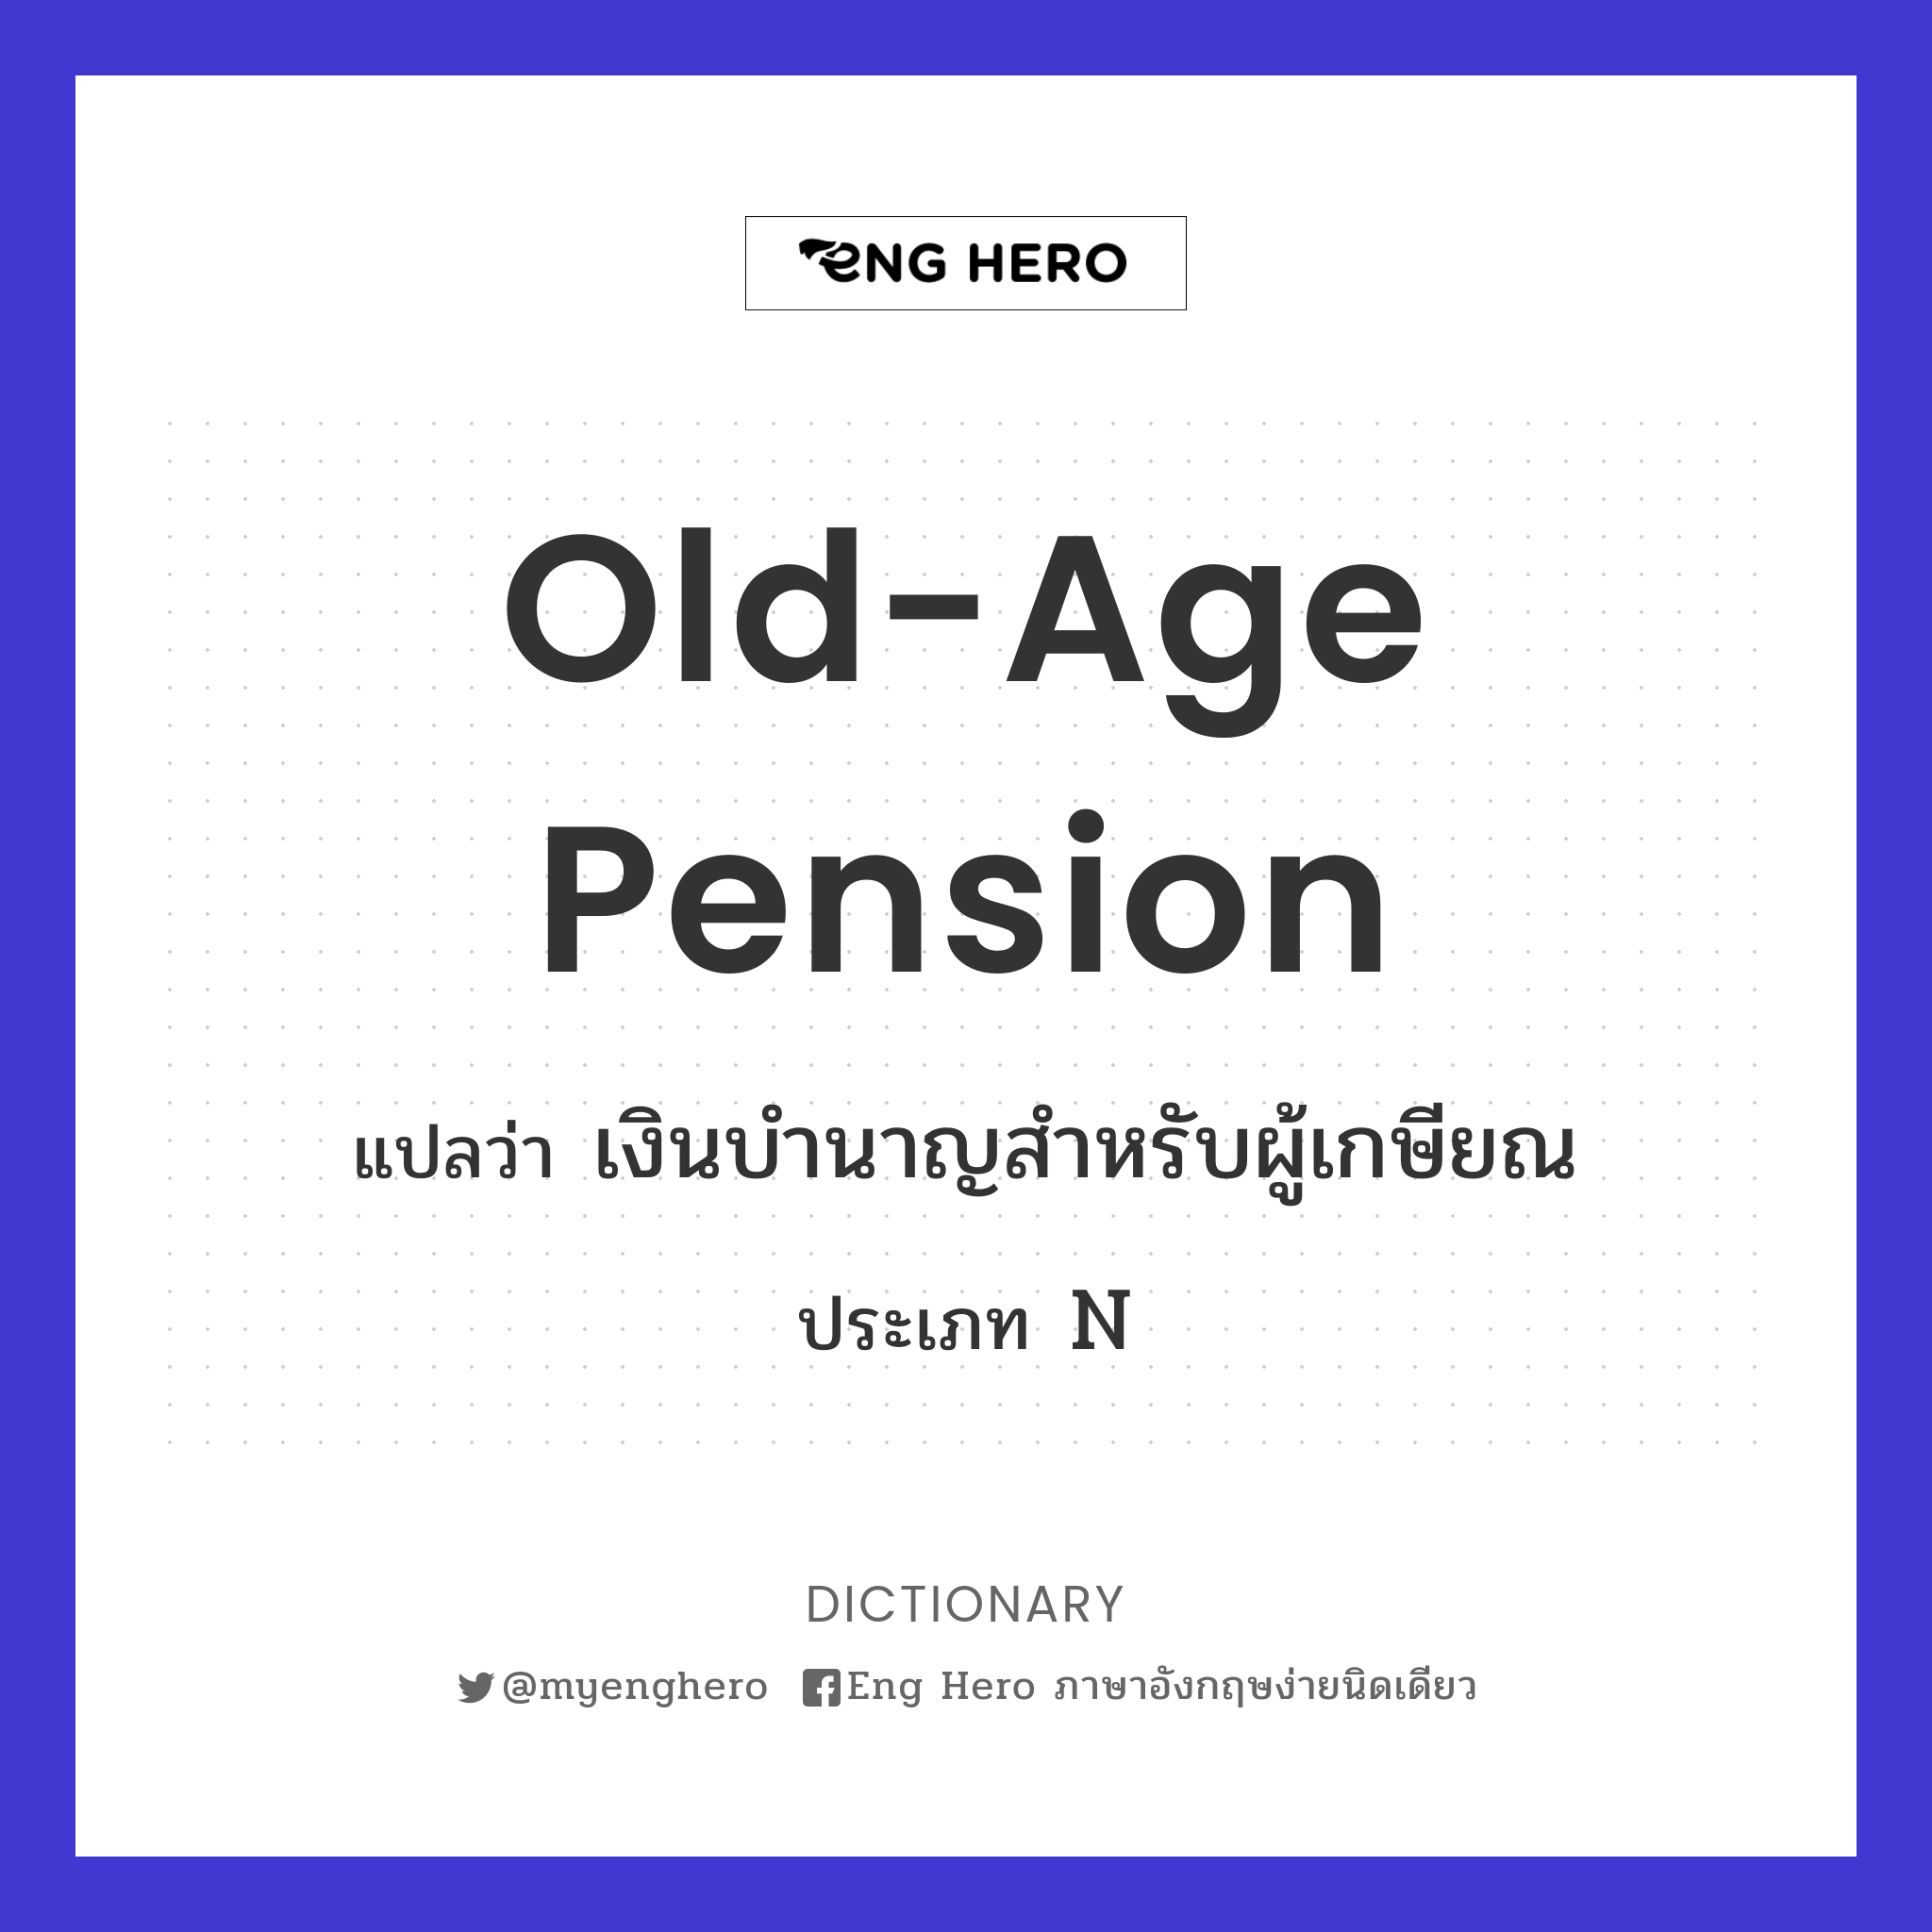 old-age pension